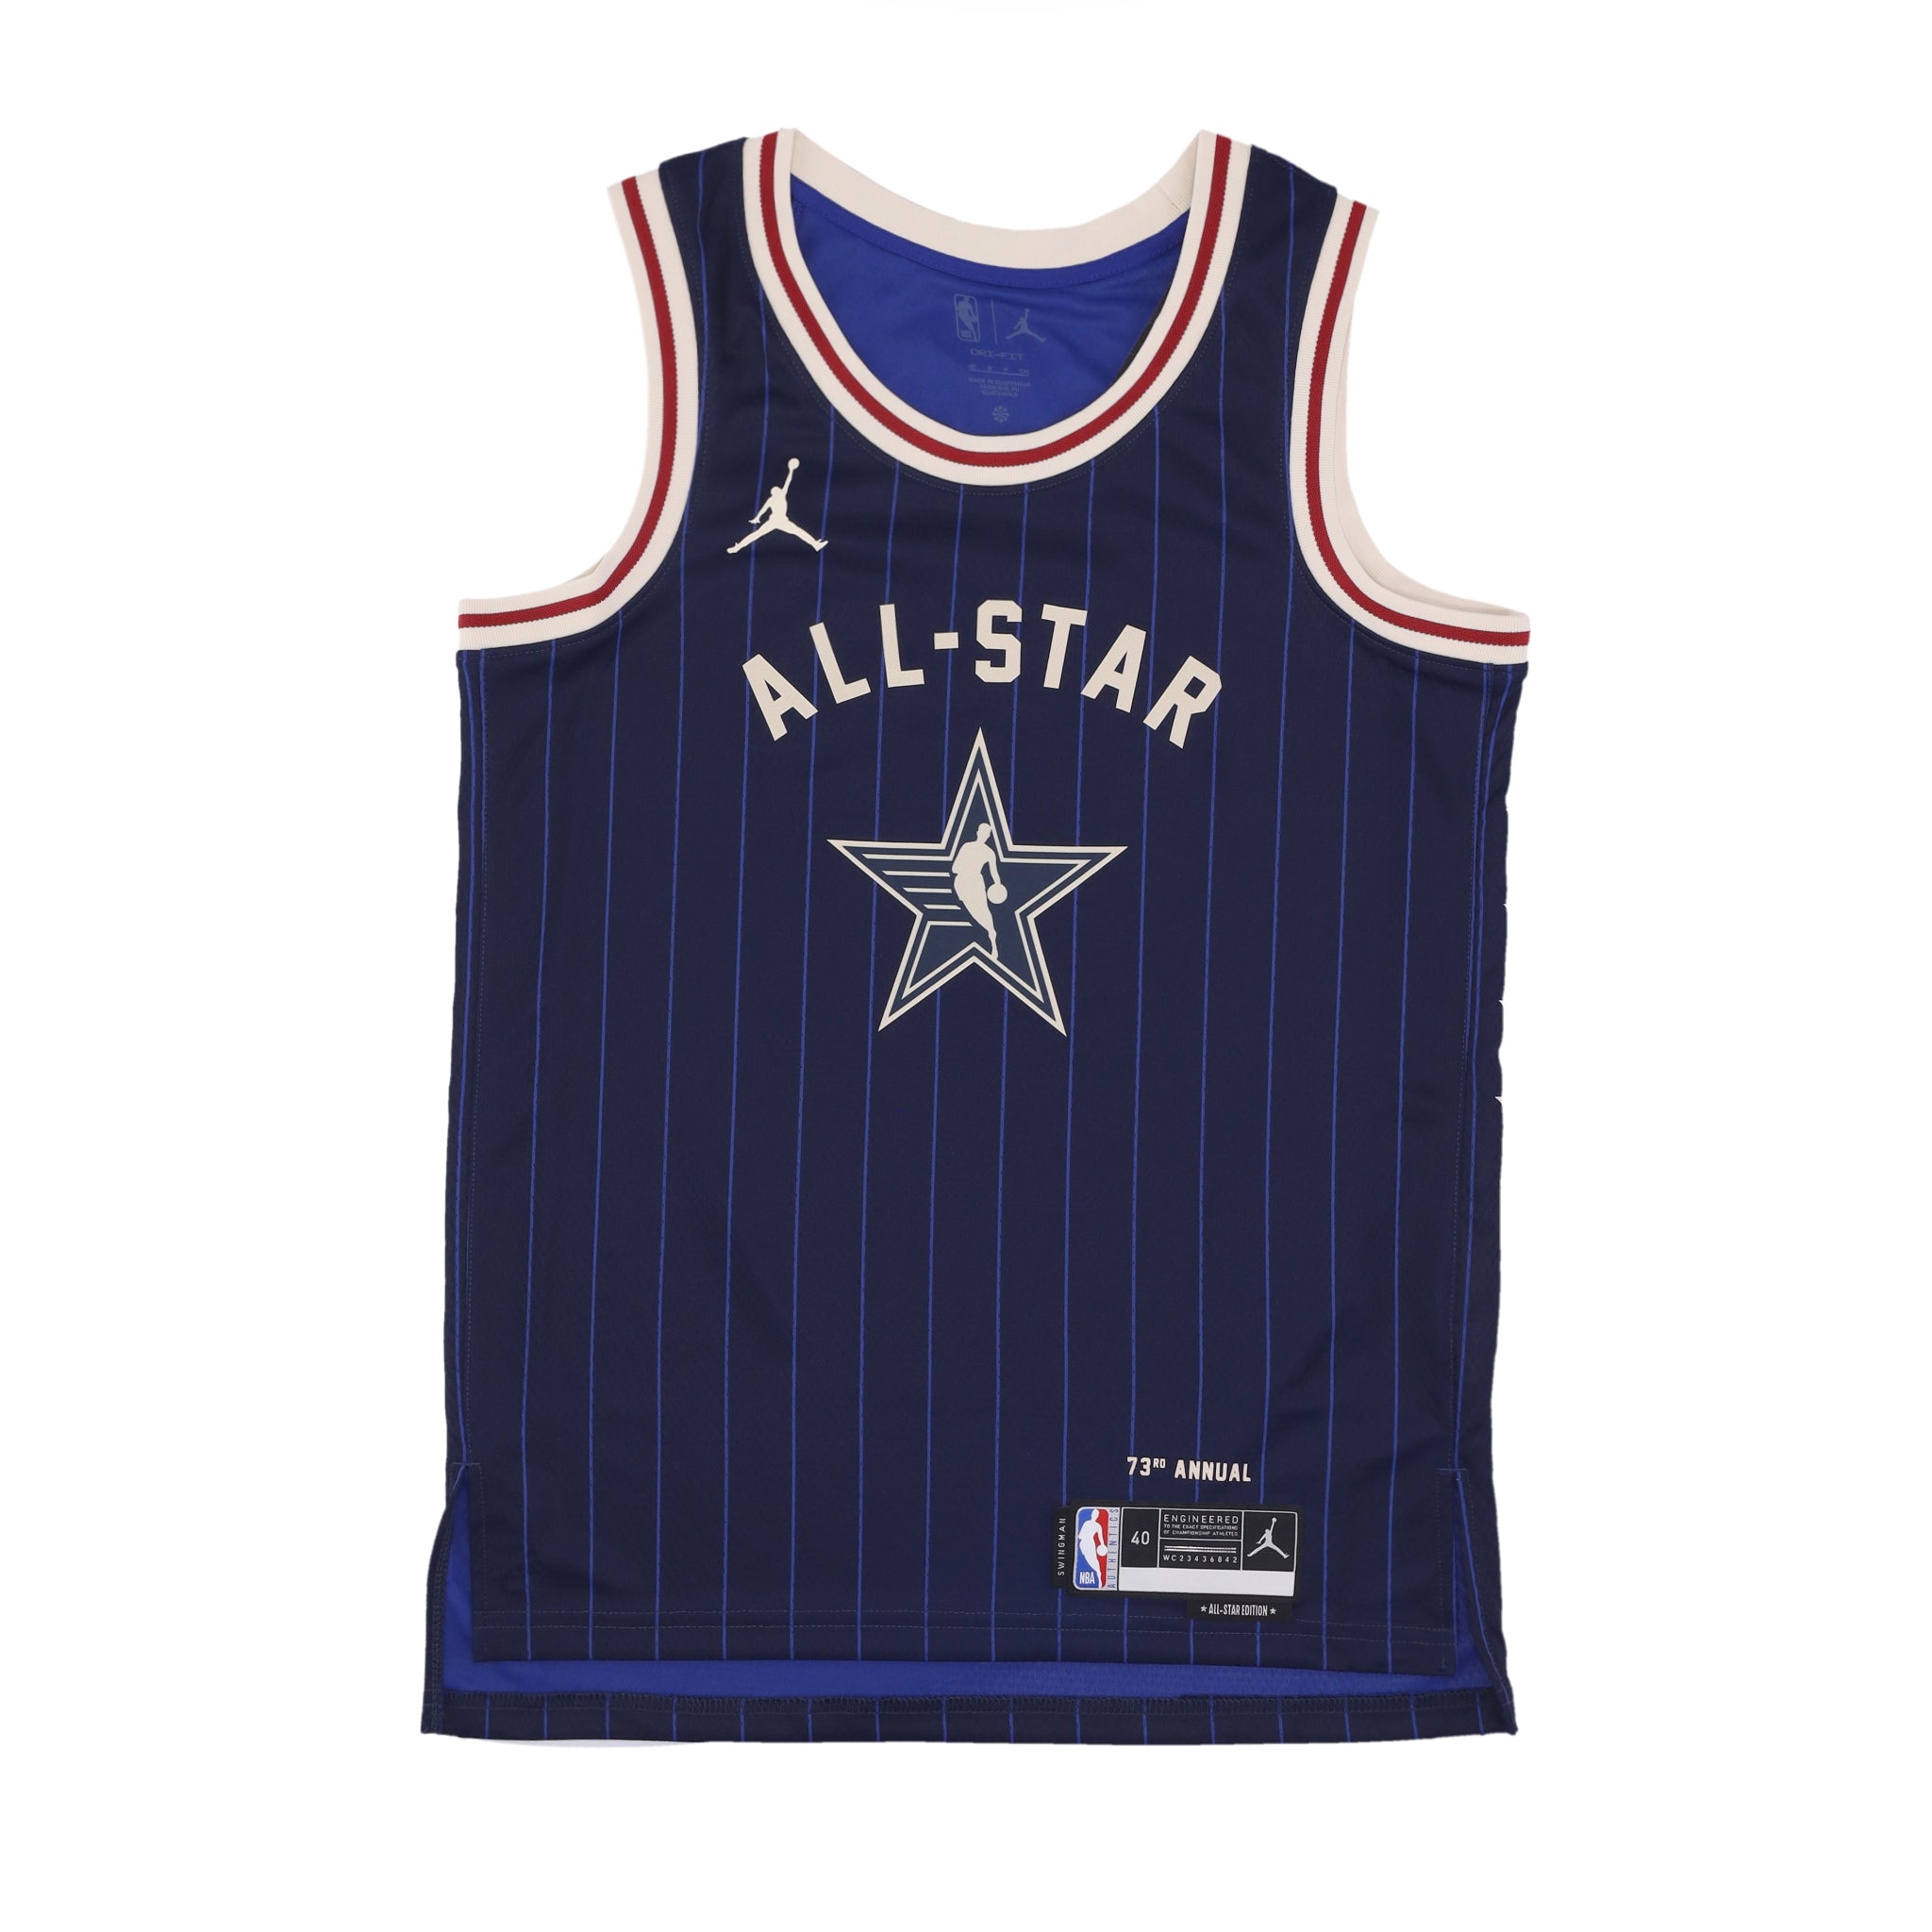 Canotta Basket Uomo Nba All Star Game 2024 Dri-fit Swingman Jersey No 35 Kevin Durant Team West College Navy FQ7739-421